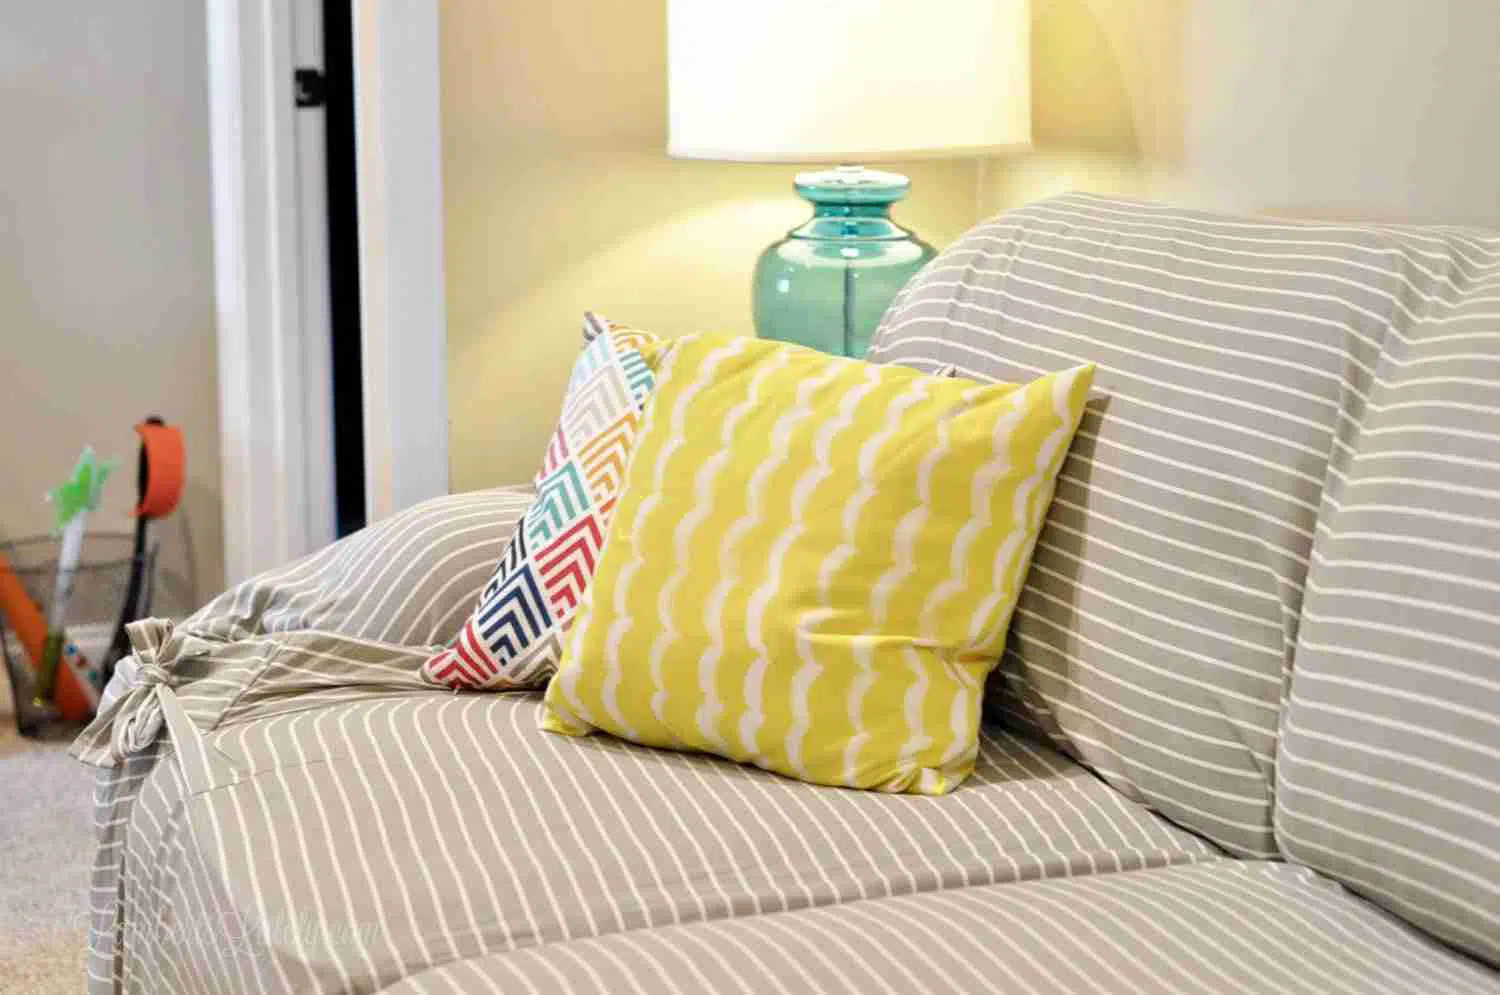 yellow pillow on a gray striped couch.